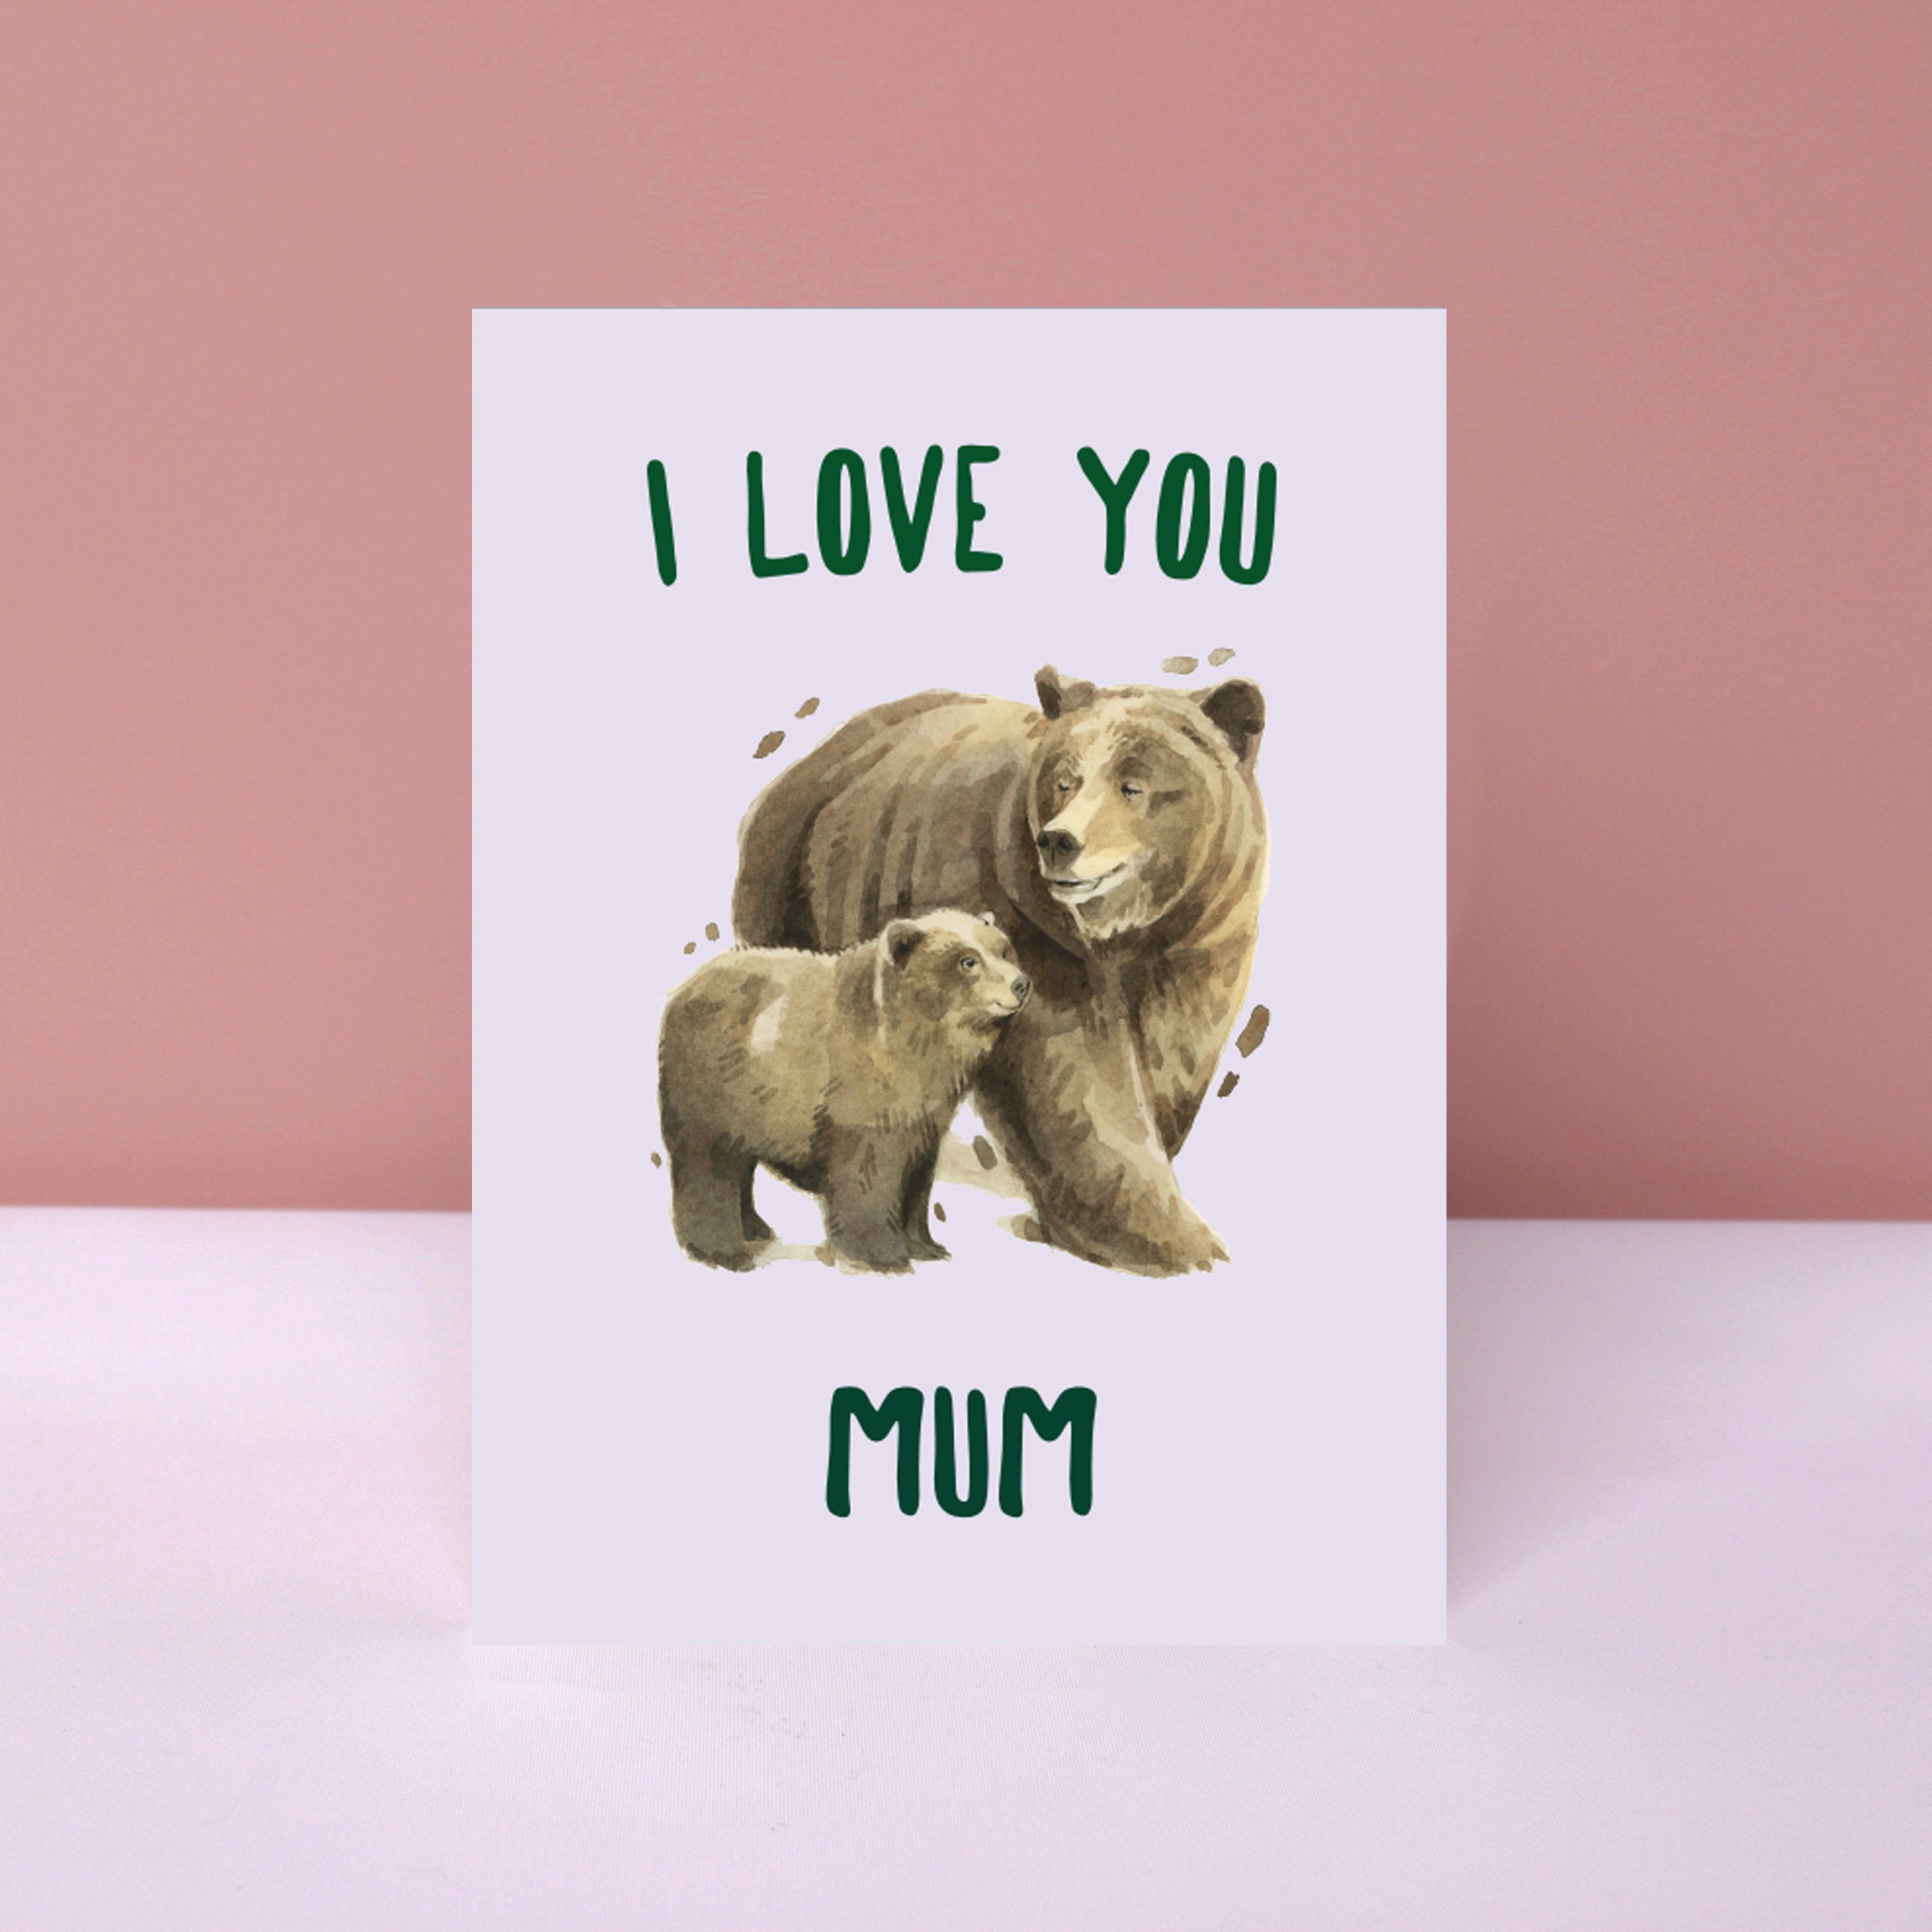 I Love You Mum, Bear Card for Mothers Day, Mum's Birthday